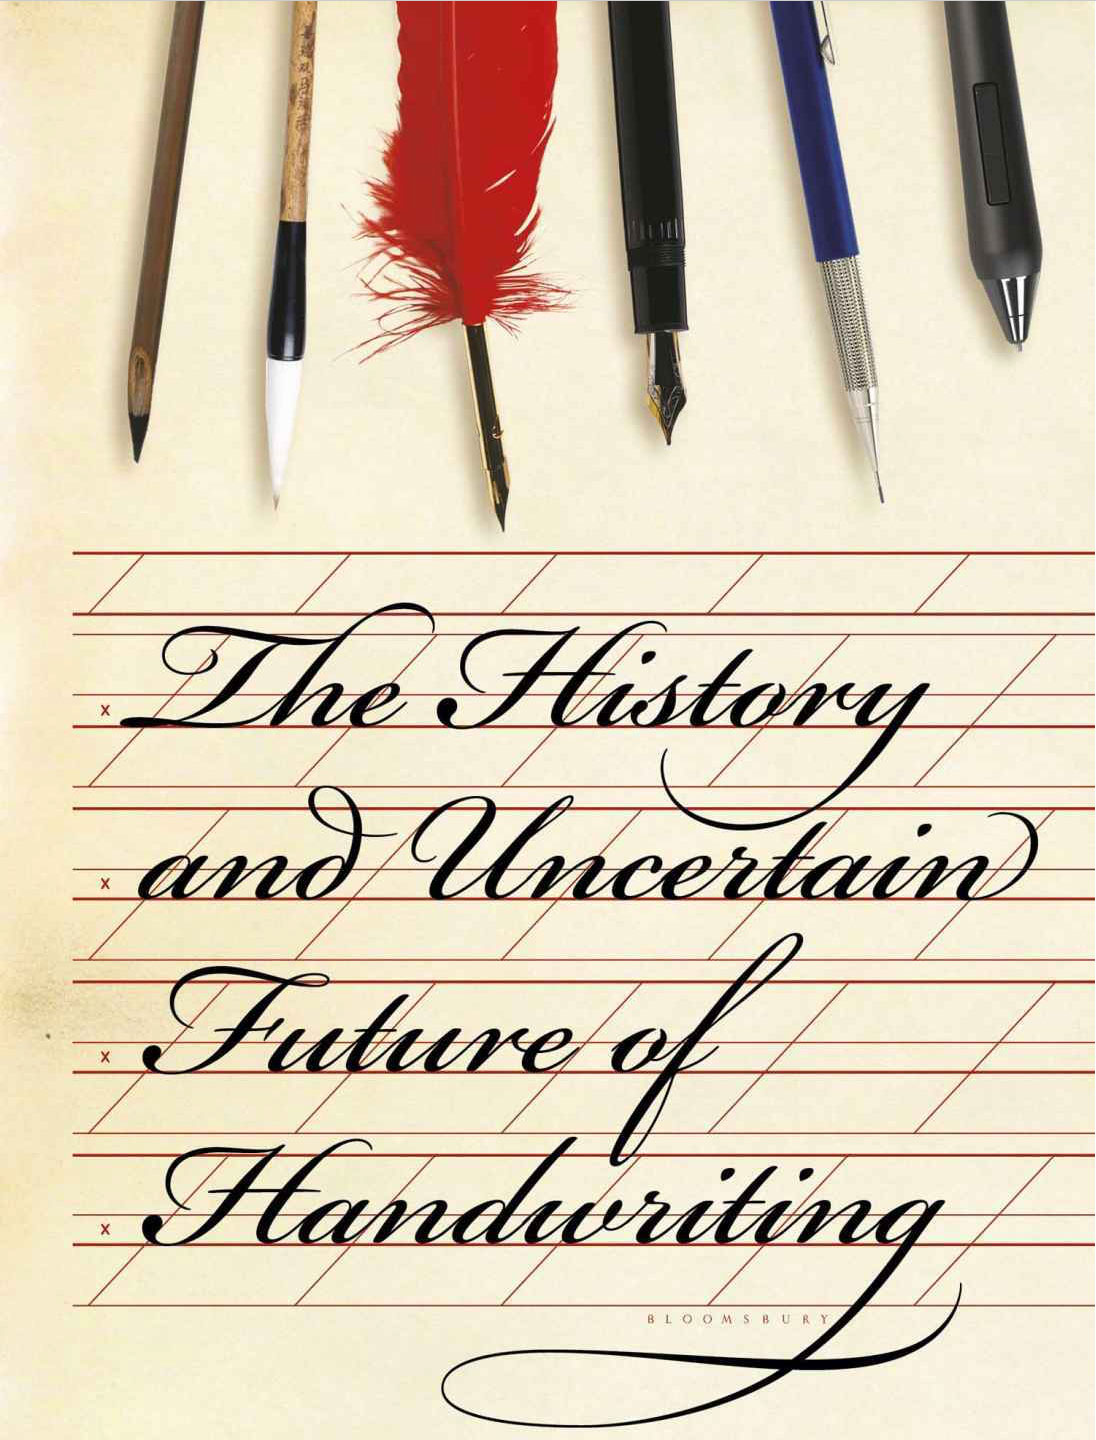 The History and Uncertain Future of Handwriting